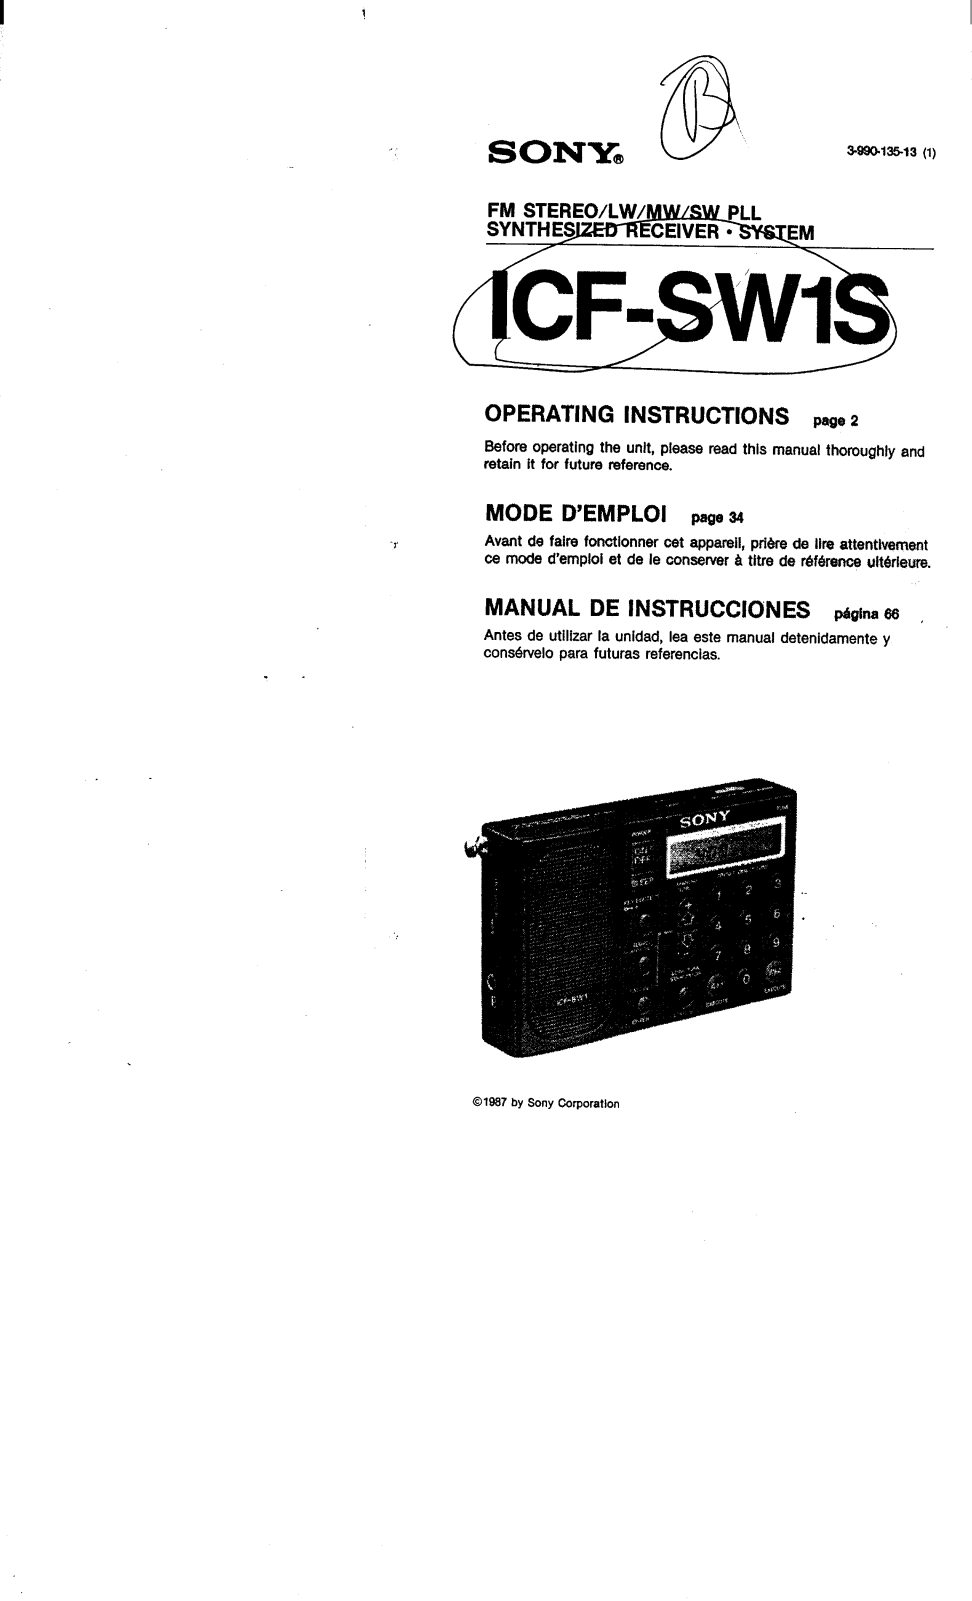 Sony ICF-SW1S Operating Instructions